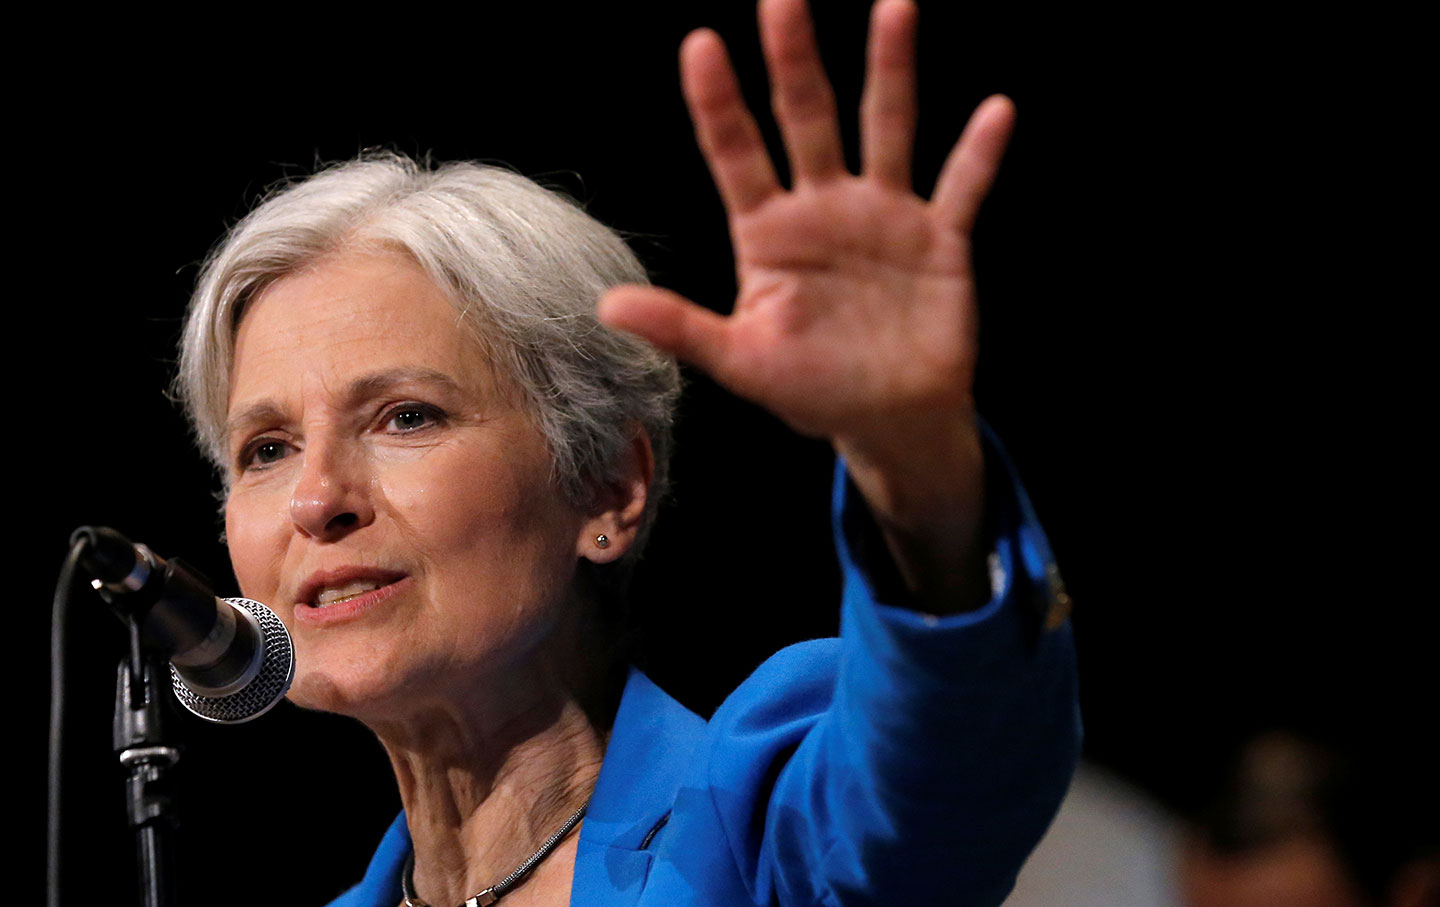 Don’t Waste Your Vote on the Corporate Agenda—Vote for Jill Stein and the Greens